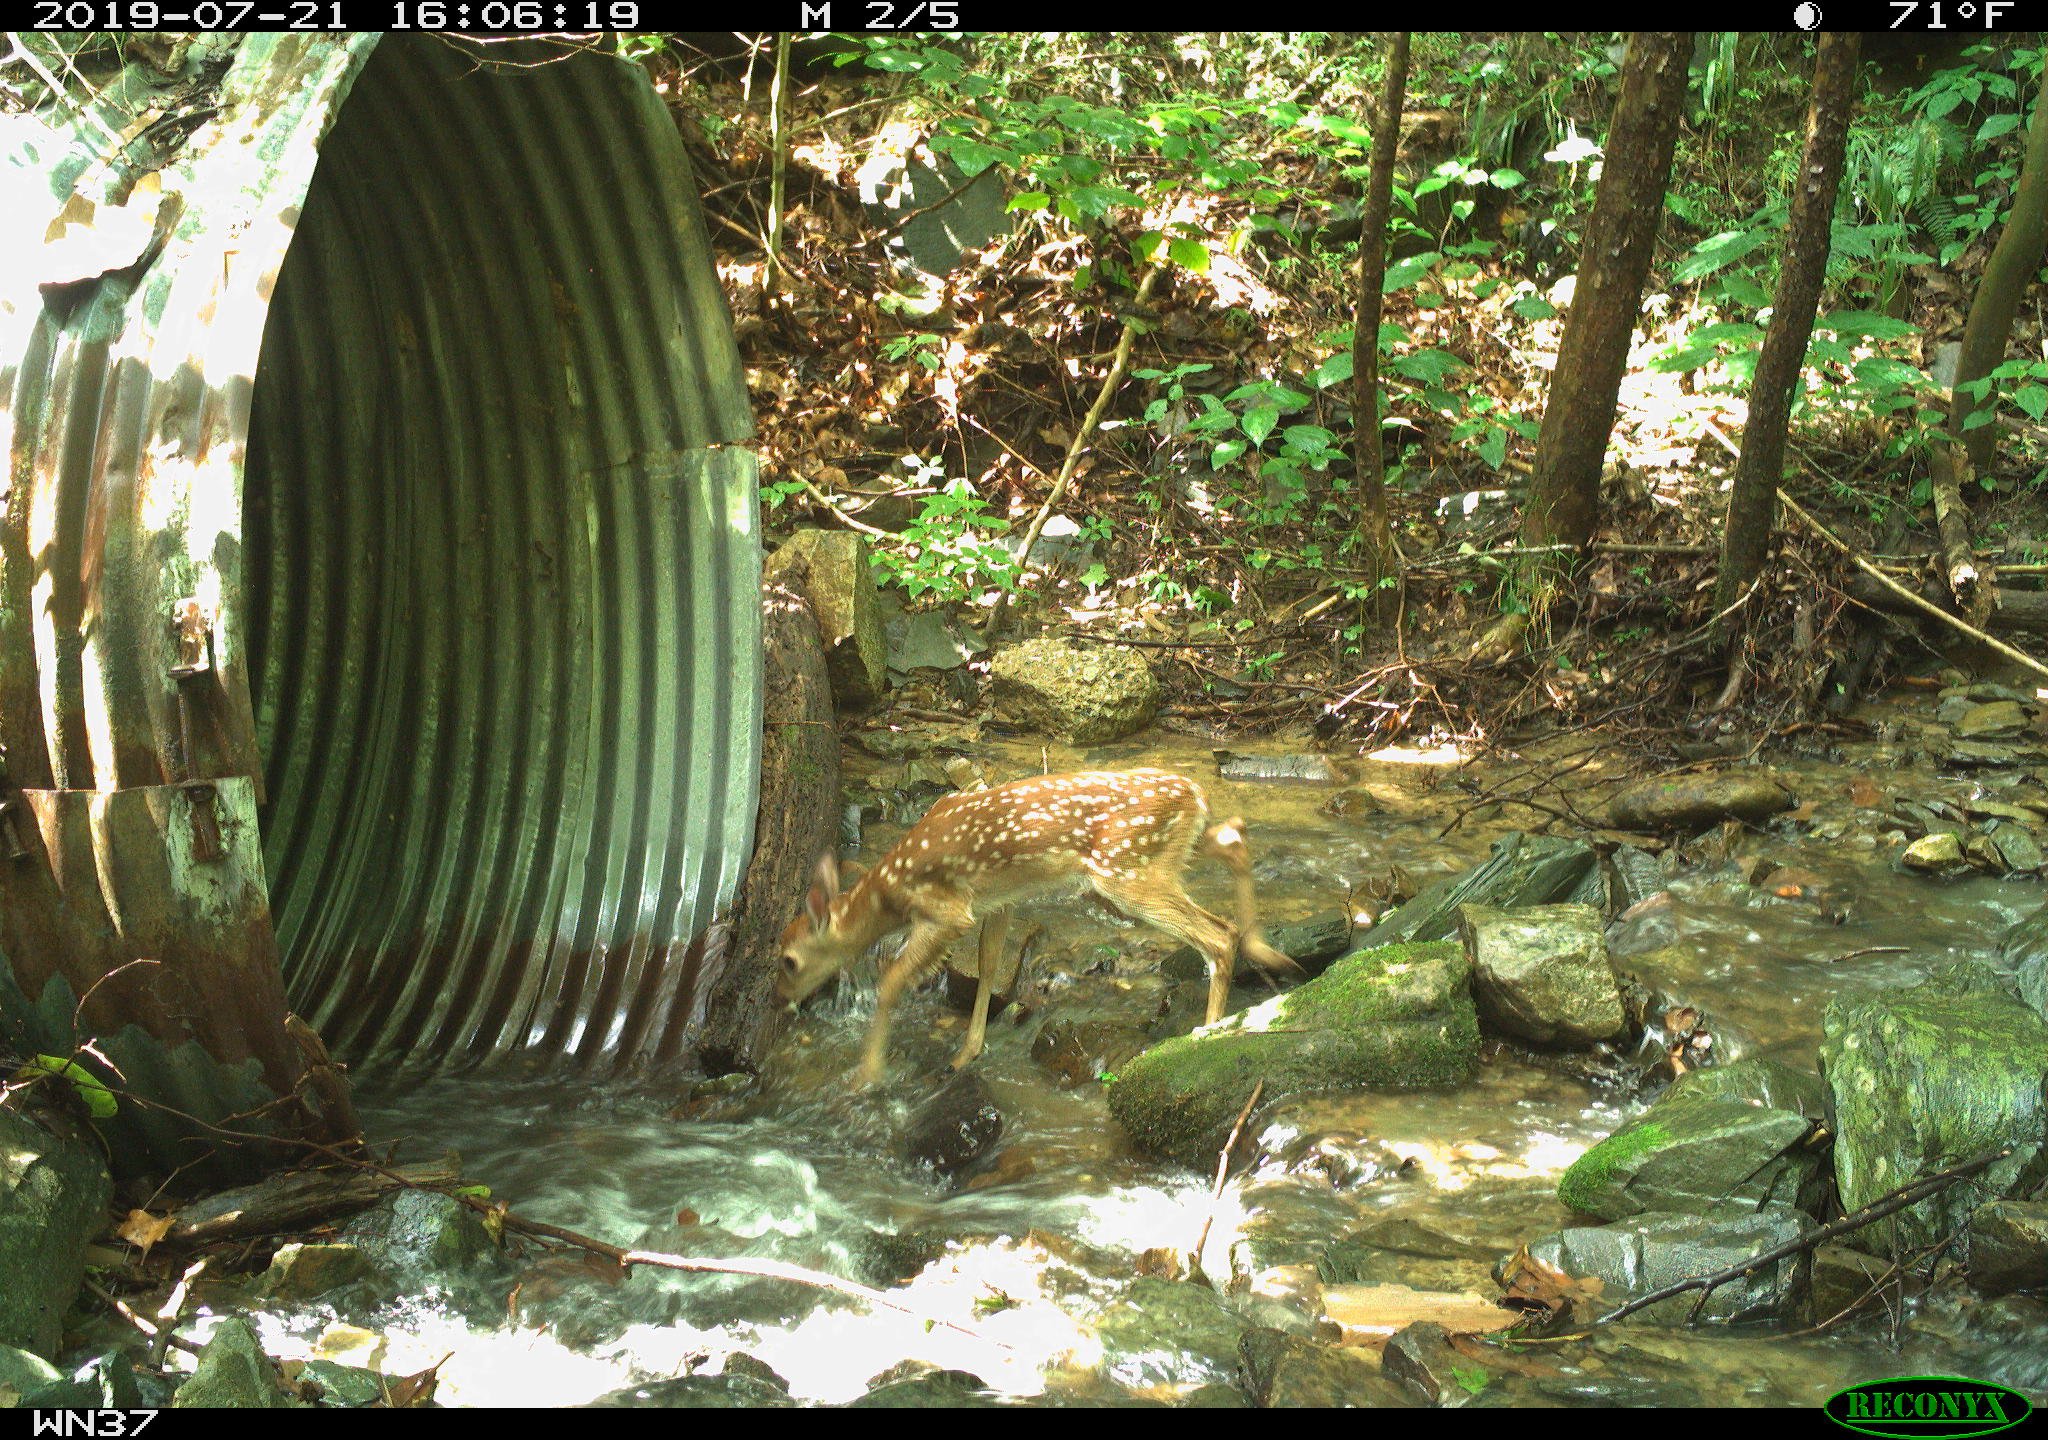  A fawn enters a culvert in the Pigeon River Gorge. Photo: Wildlands Network/NPCA 